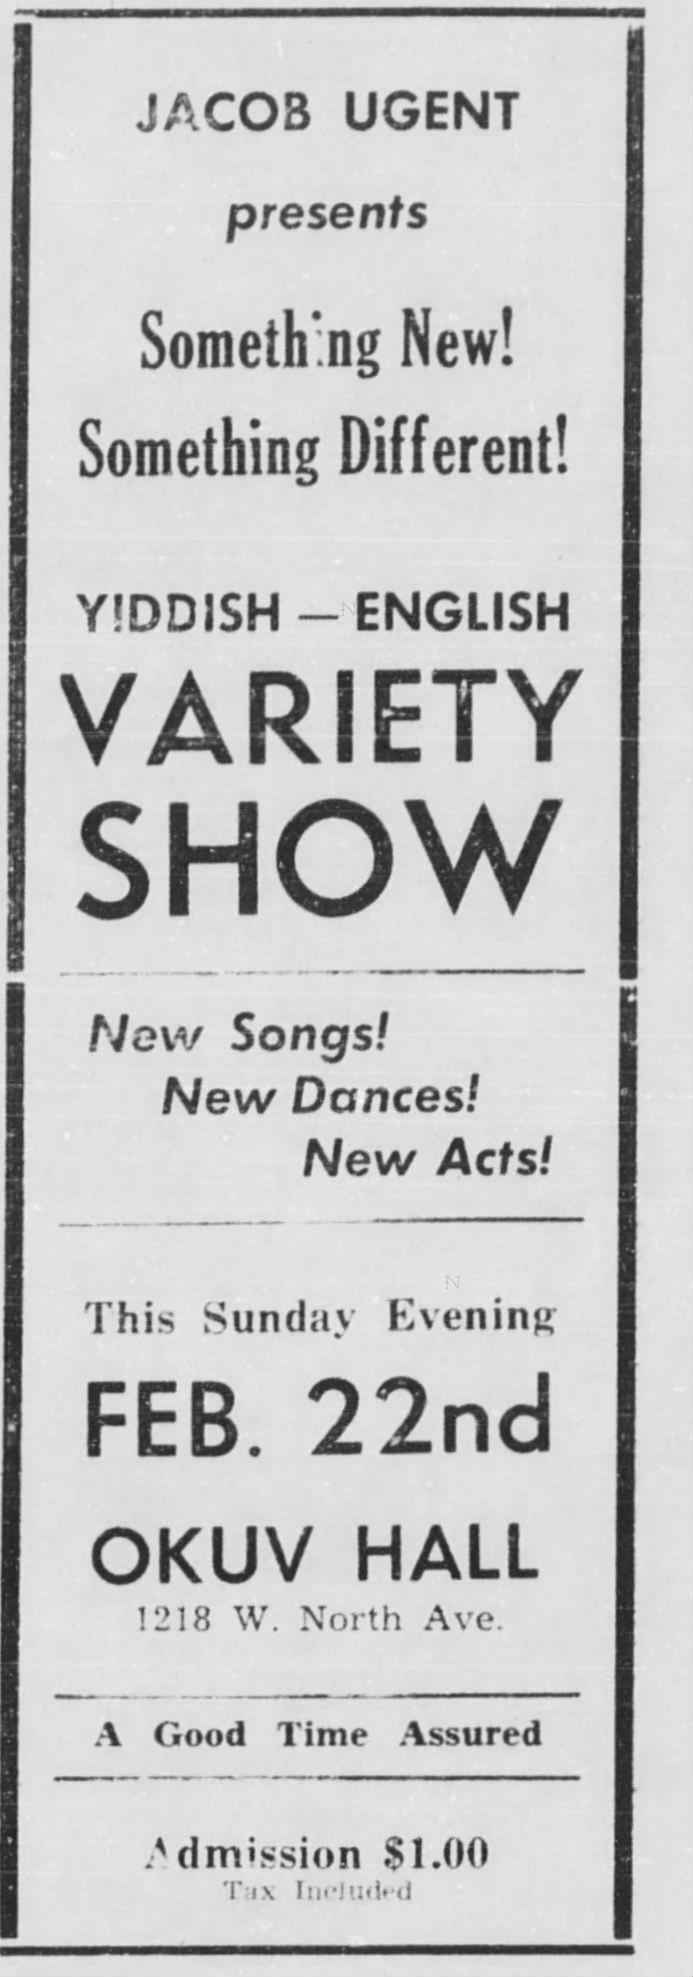 Jacob Ugent Variety Show announcement 20 Feb 1948 WI Jewish Chronicle